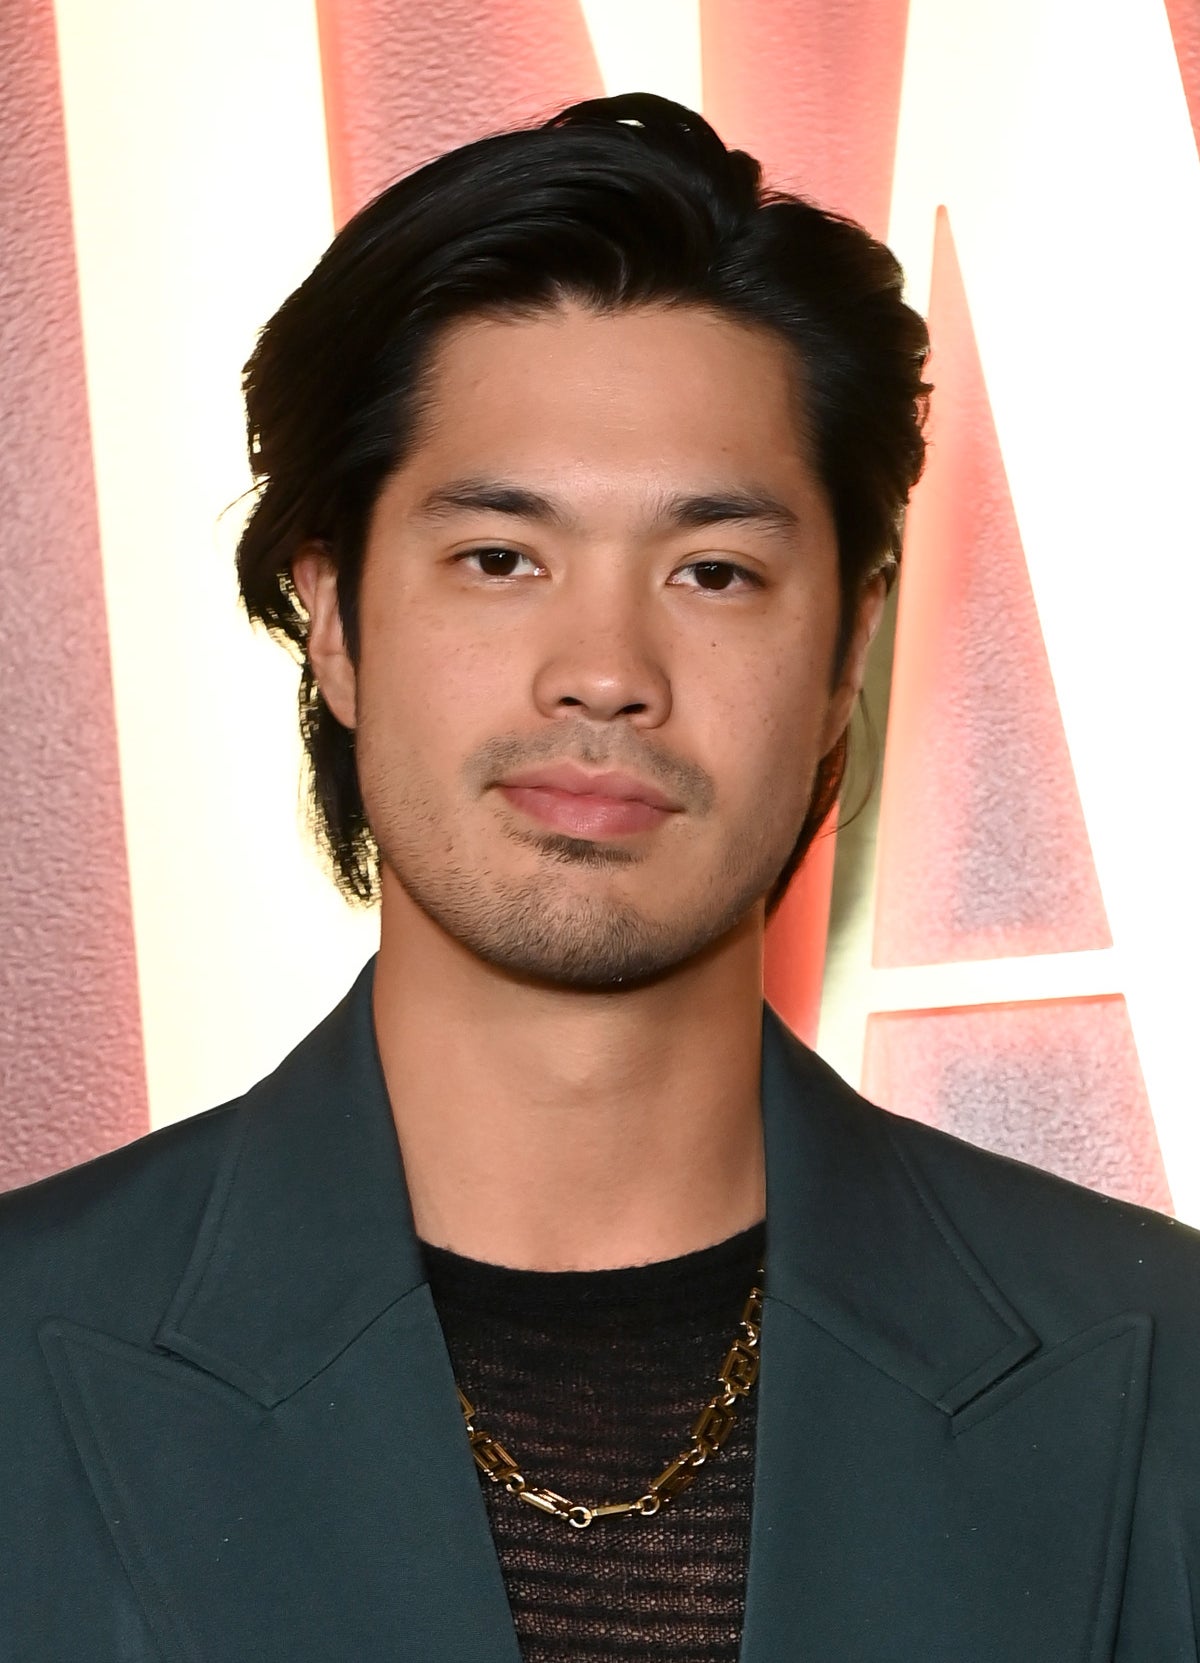 Ross Butler posing at event, wearing a blazer over a mesh top with layered necklaces